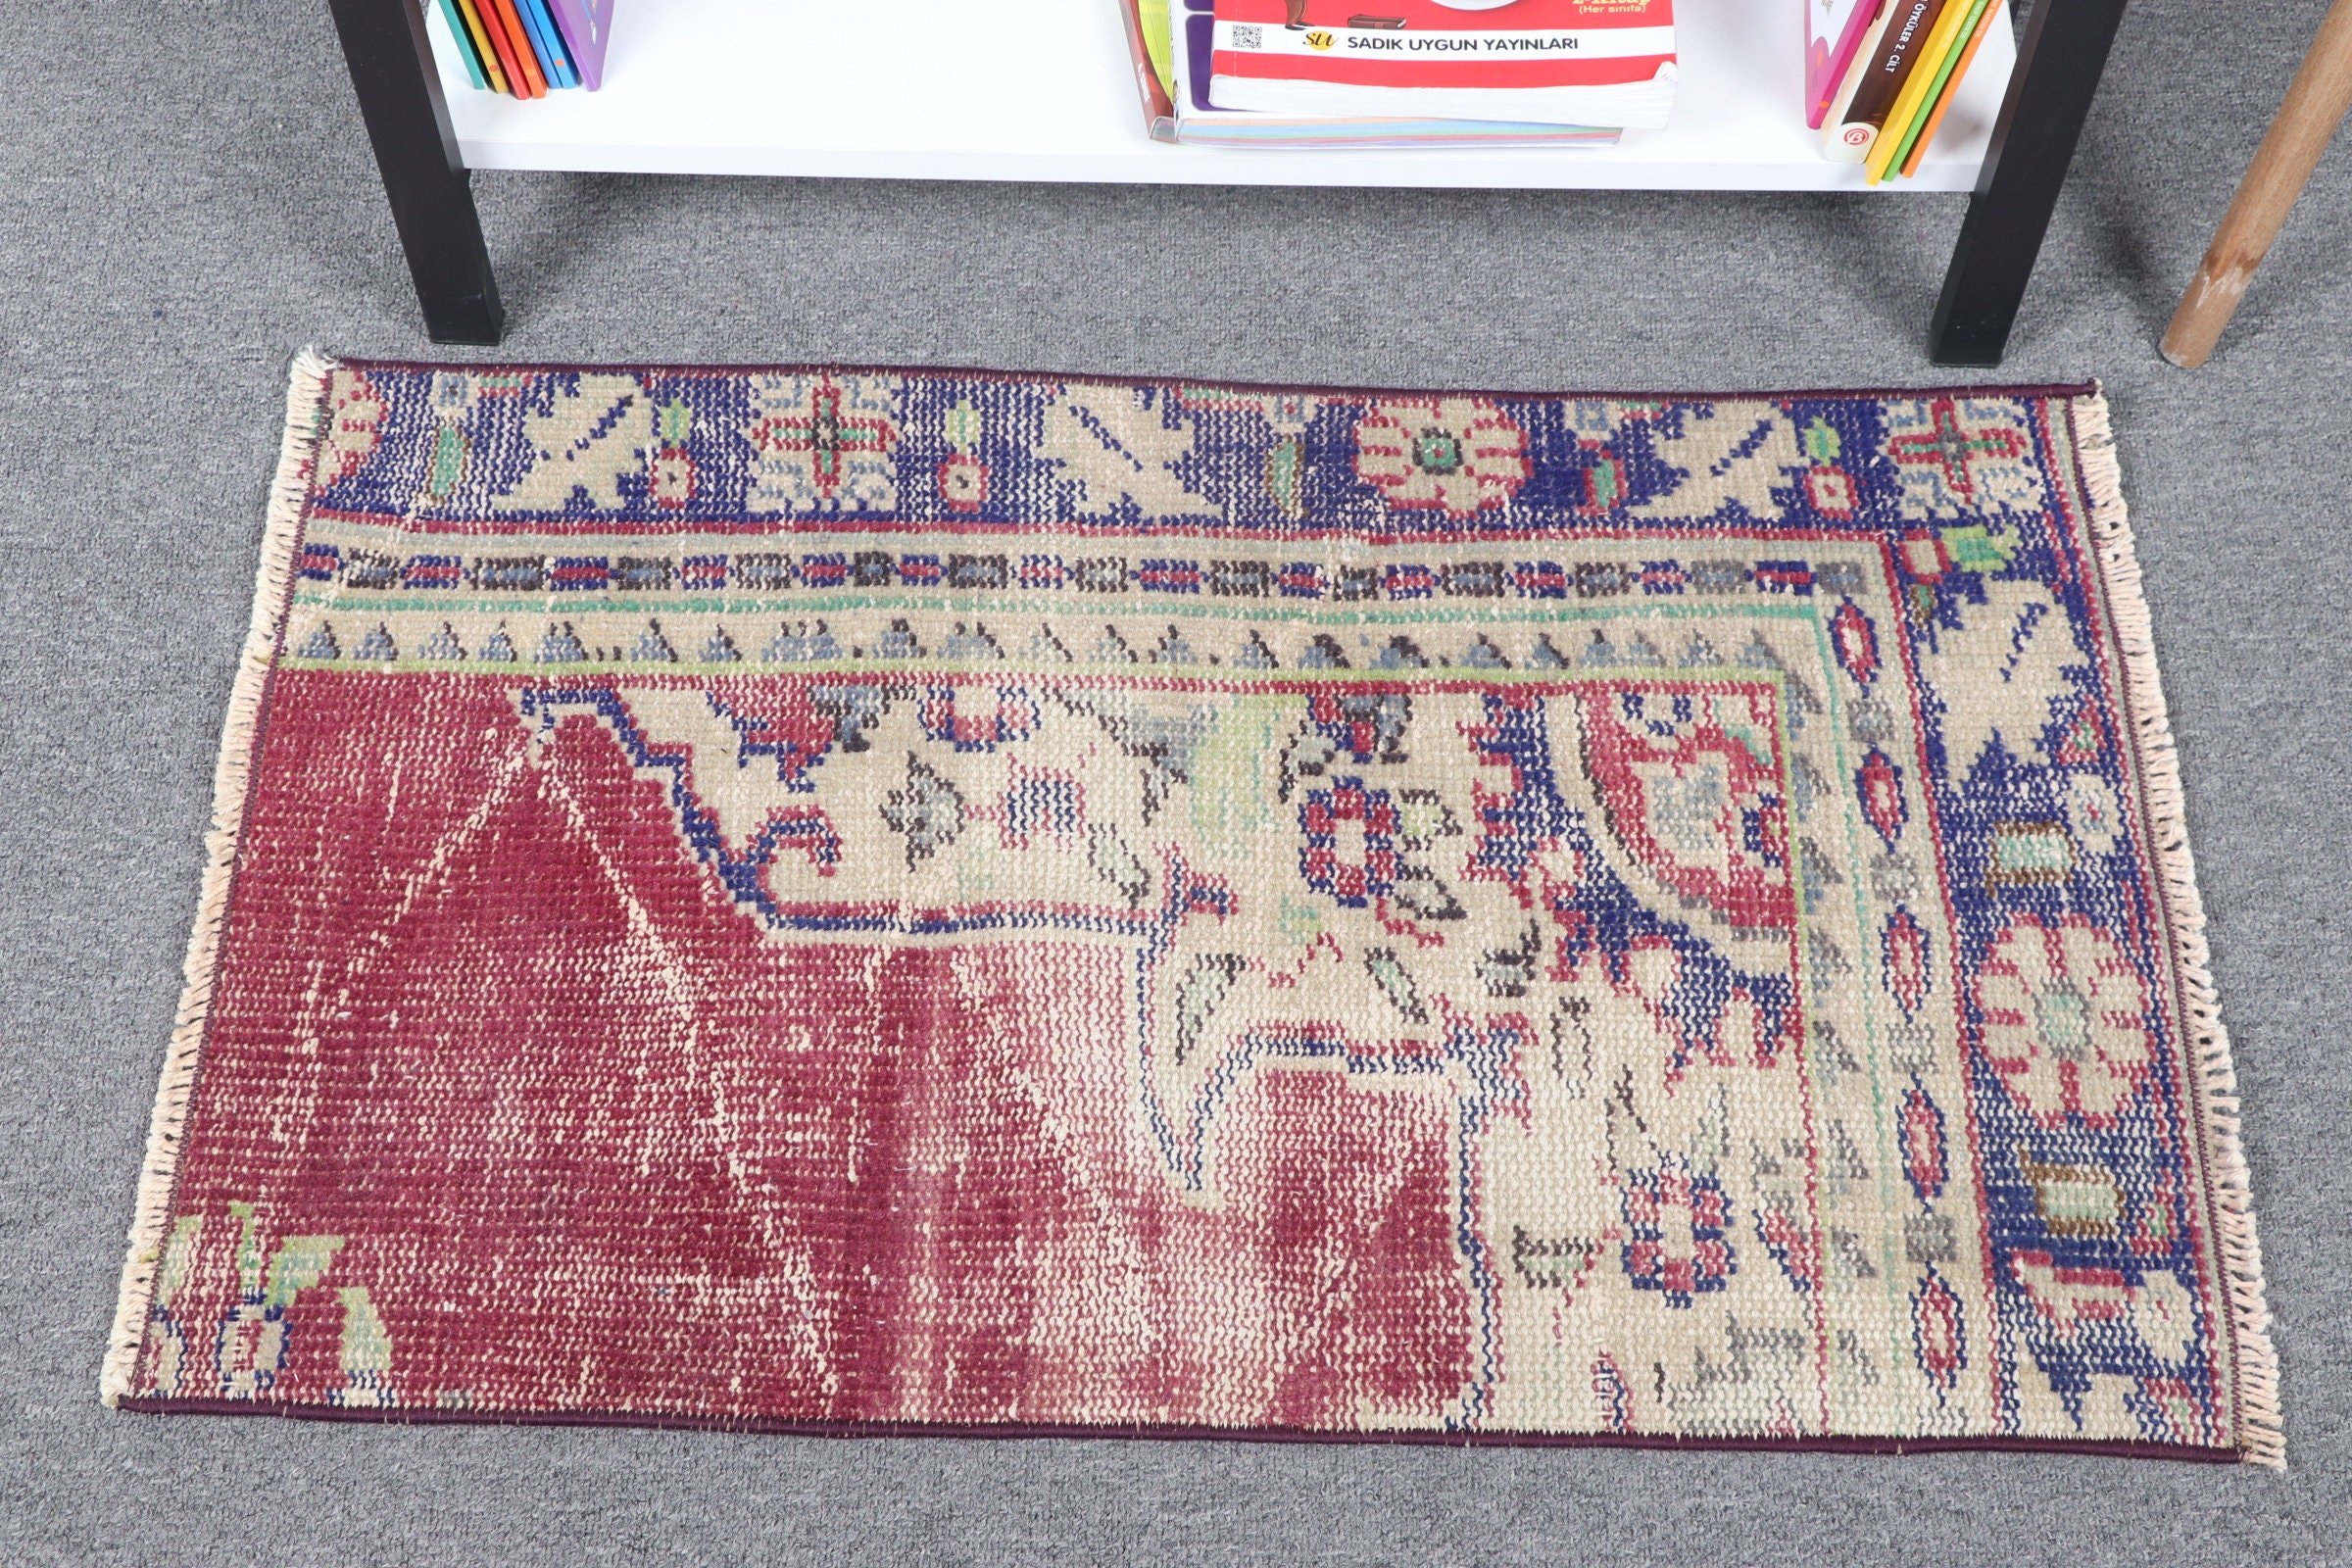 Purple Oriental Rug, Turkish Rug, Antique Rugs, Kitchen Rugs, 1.6x2.6 ft Small Rugs, Wall Hanging Rug, Vintage Rug, Home Decor Rugs